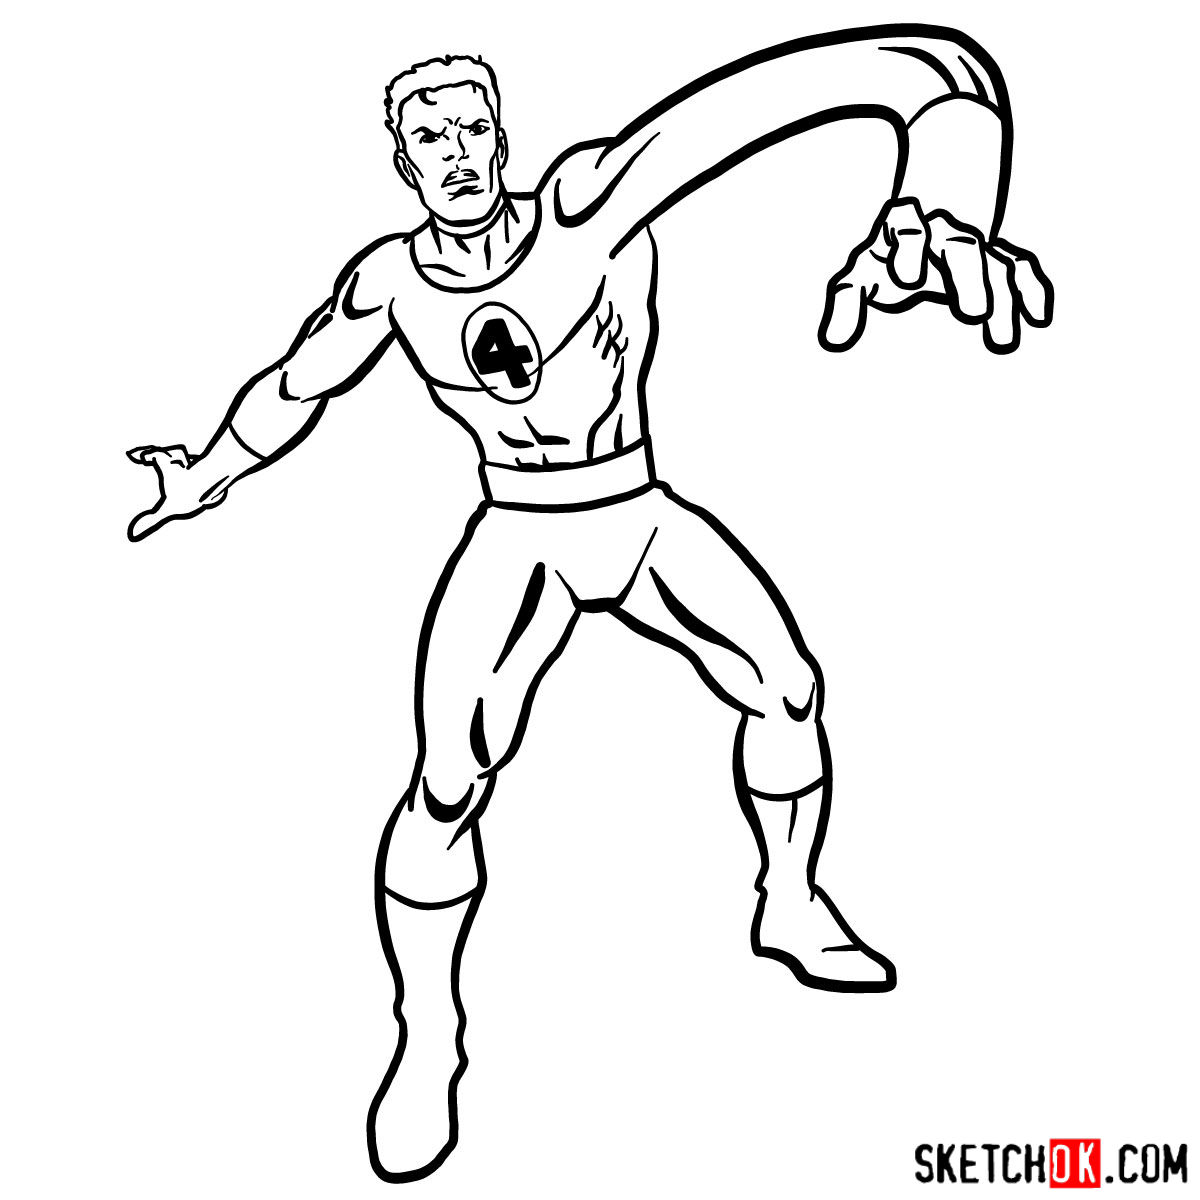 How to draw Mister Fantastic from Fantastic Four - step 12